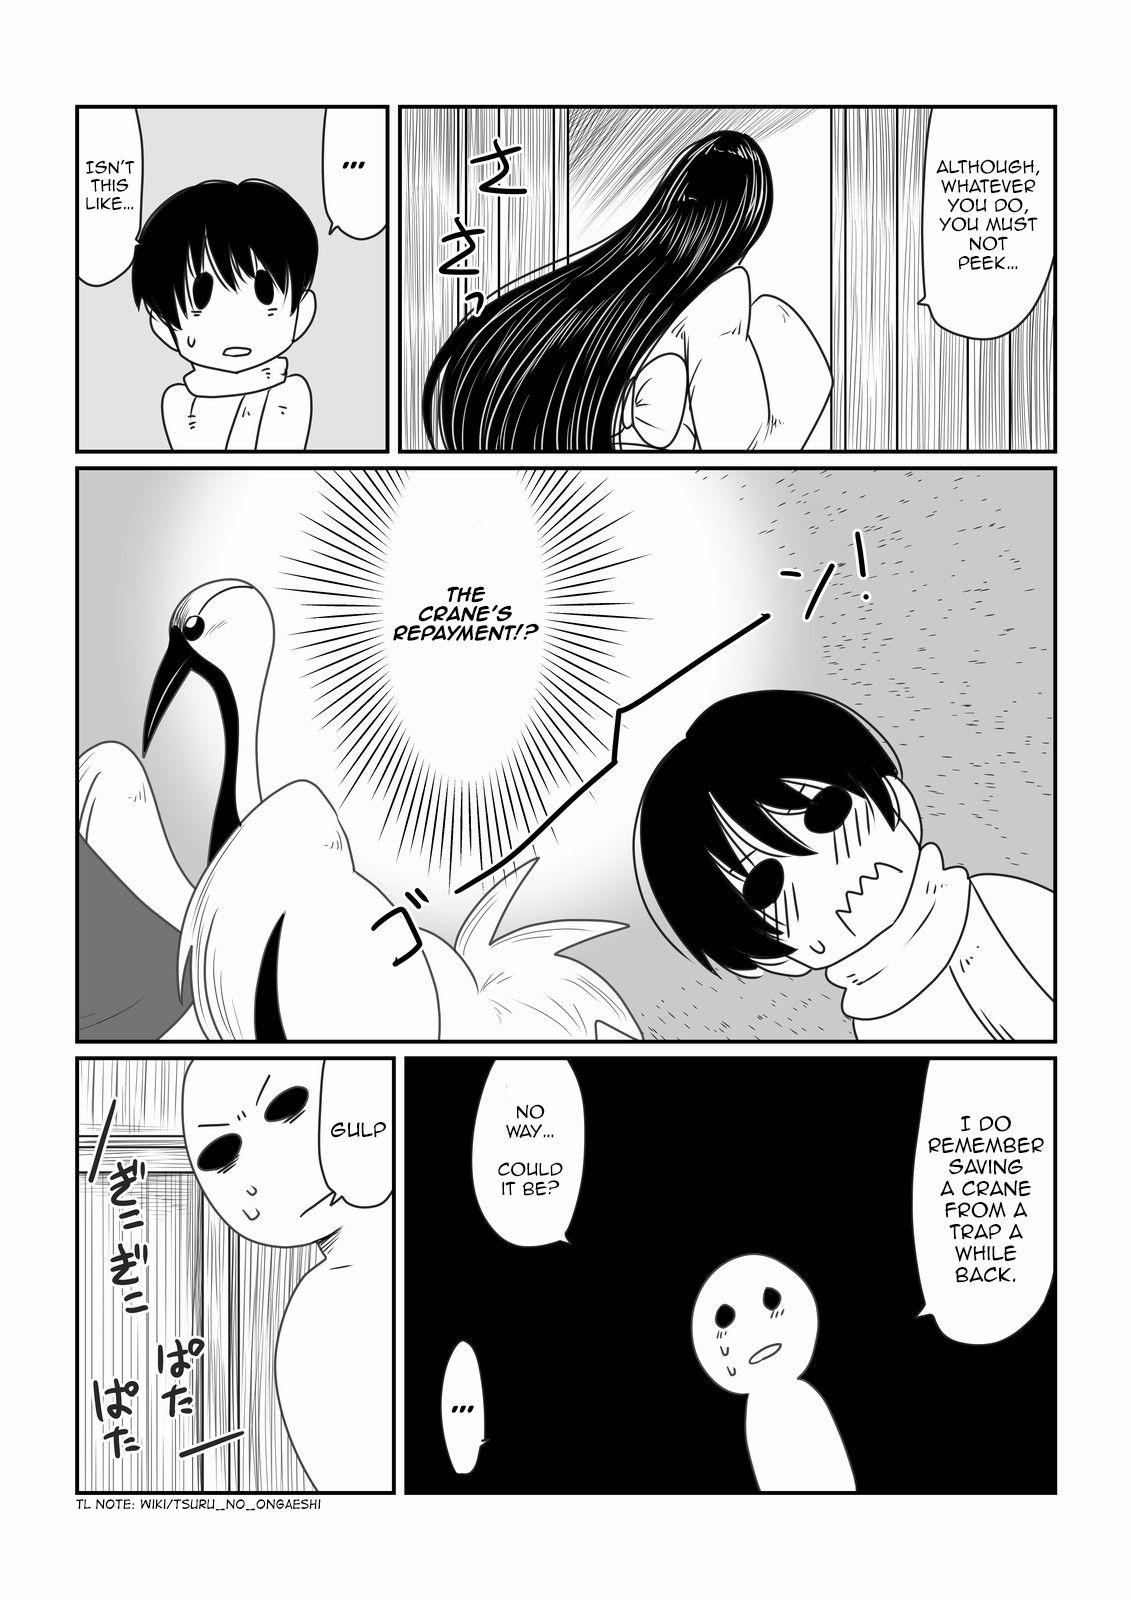 Lesbians Kumo Onna-san no Ongaeshi. | The Spider Woman's Repayment. - Original Doggy Style - Page 3